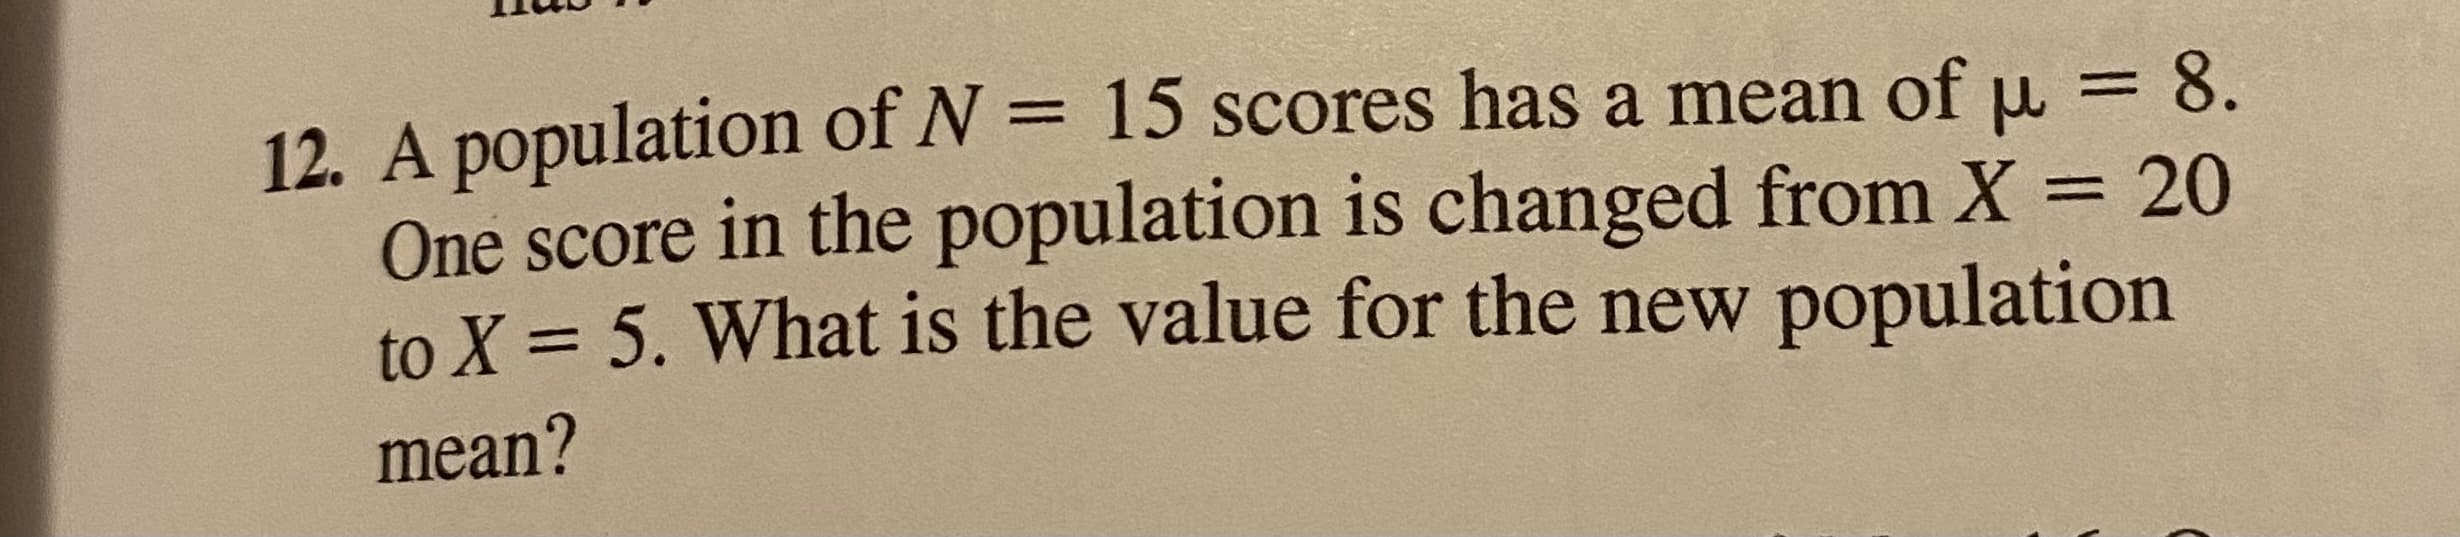 A population of N = 15 scores has a mean of u = 8.
One score in the population is changed from X = 20
to X = 5. What is the value for the new population
%3D
%D
mean?
